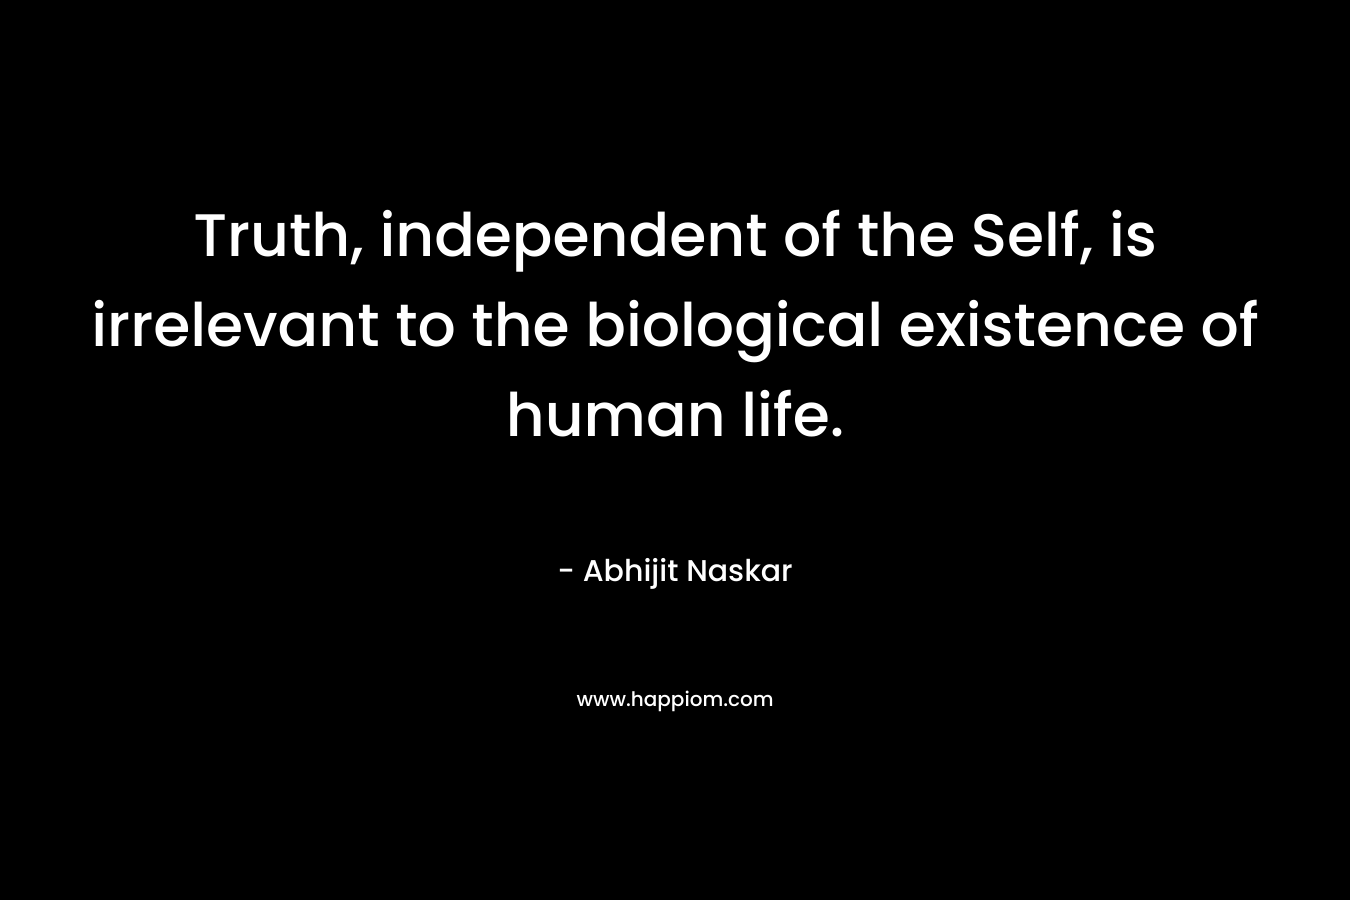 Truth, independent of the Self, is irrelevant to the biological existence of human life.